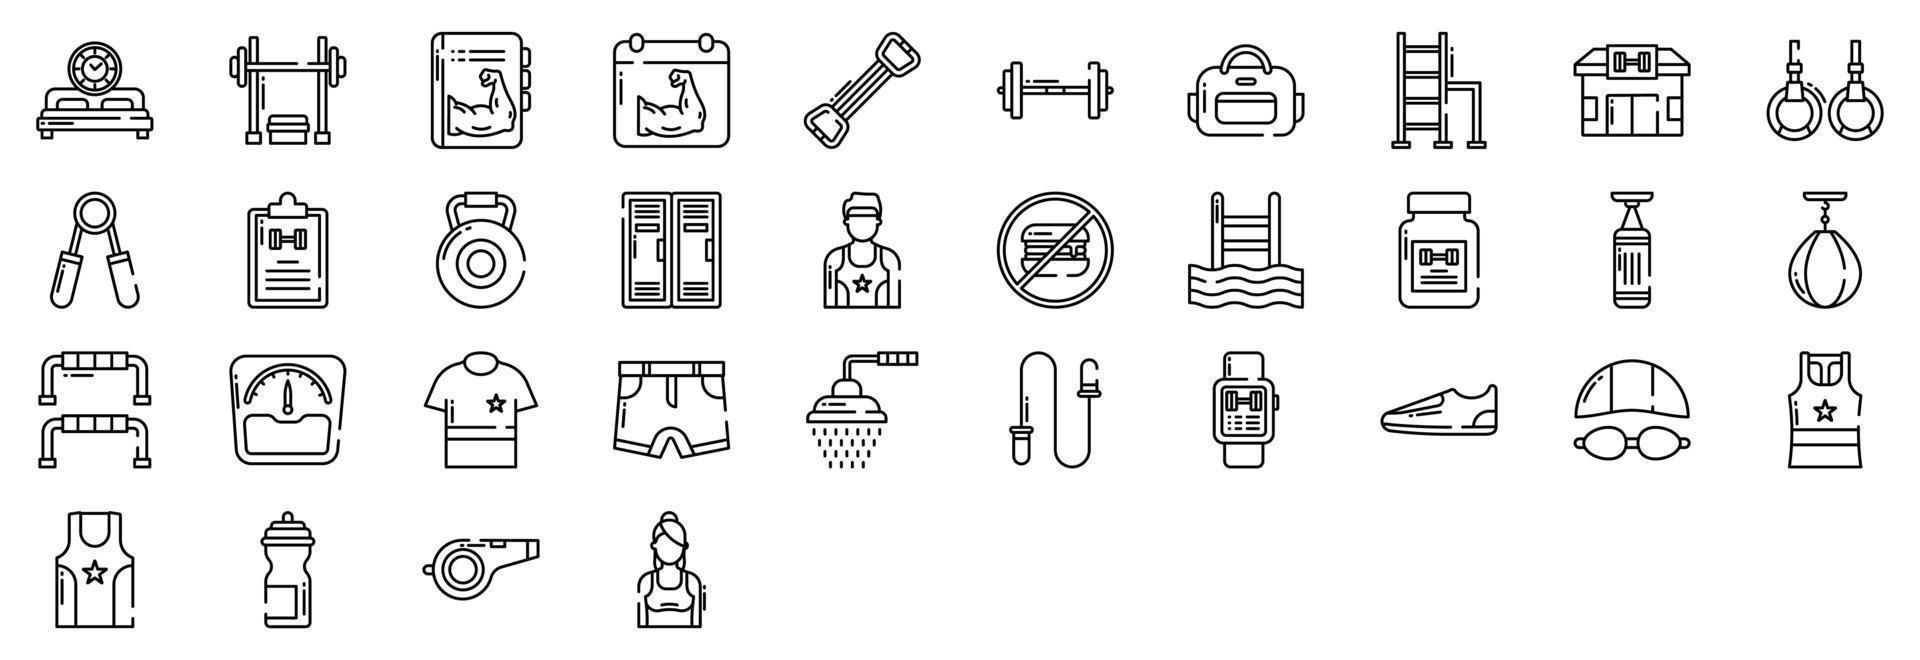 Collection of icons related to Gym and exercise, including icons like Bench Press, Chest Expander, Dumbbell, Gym Bag and more. vector illustrations, Pixel Perfect set